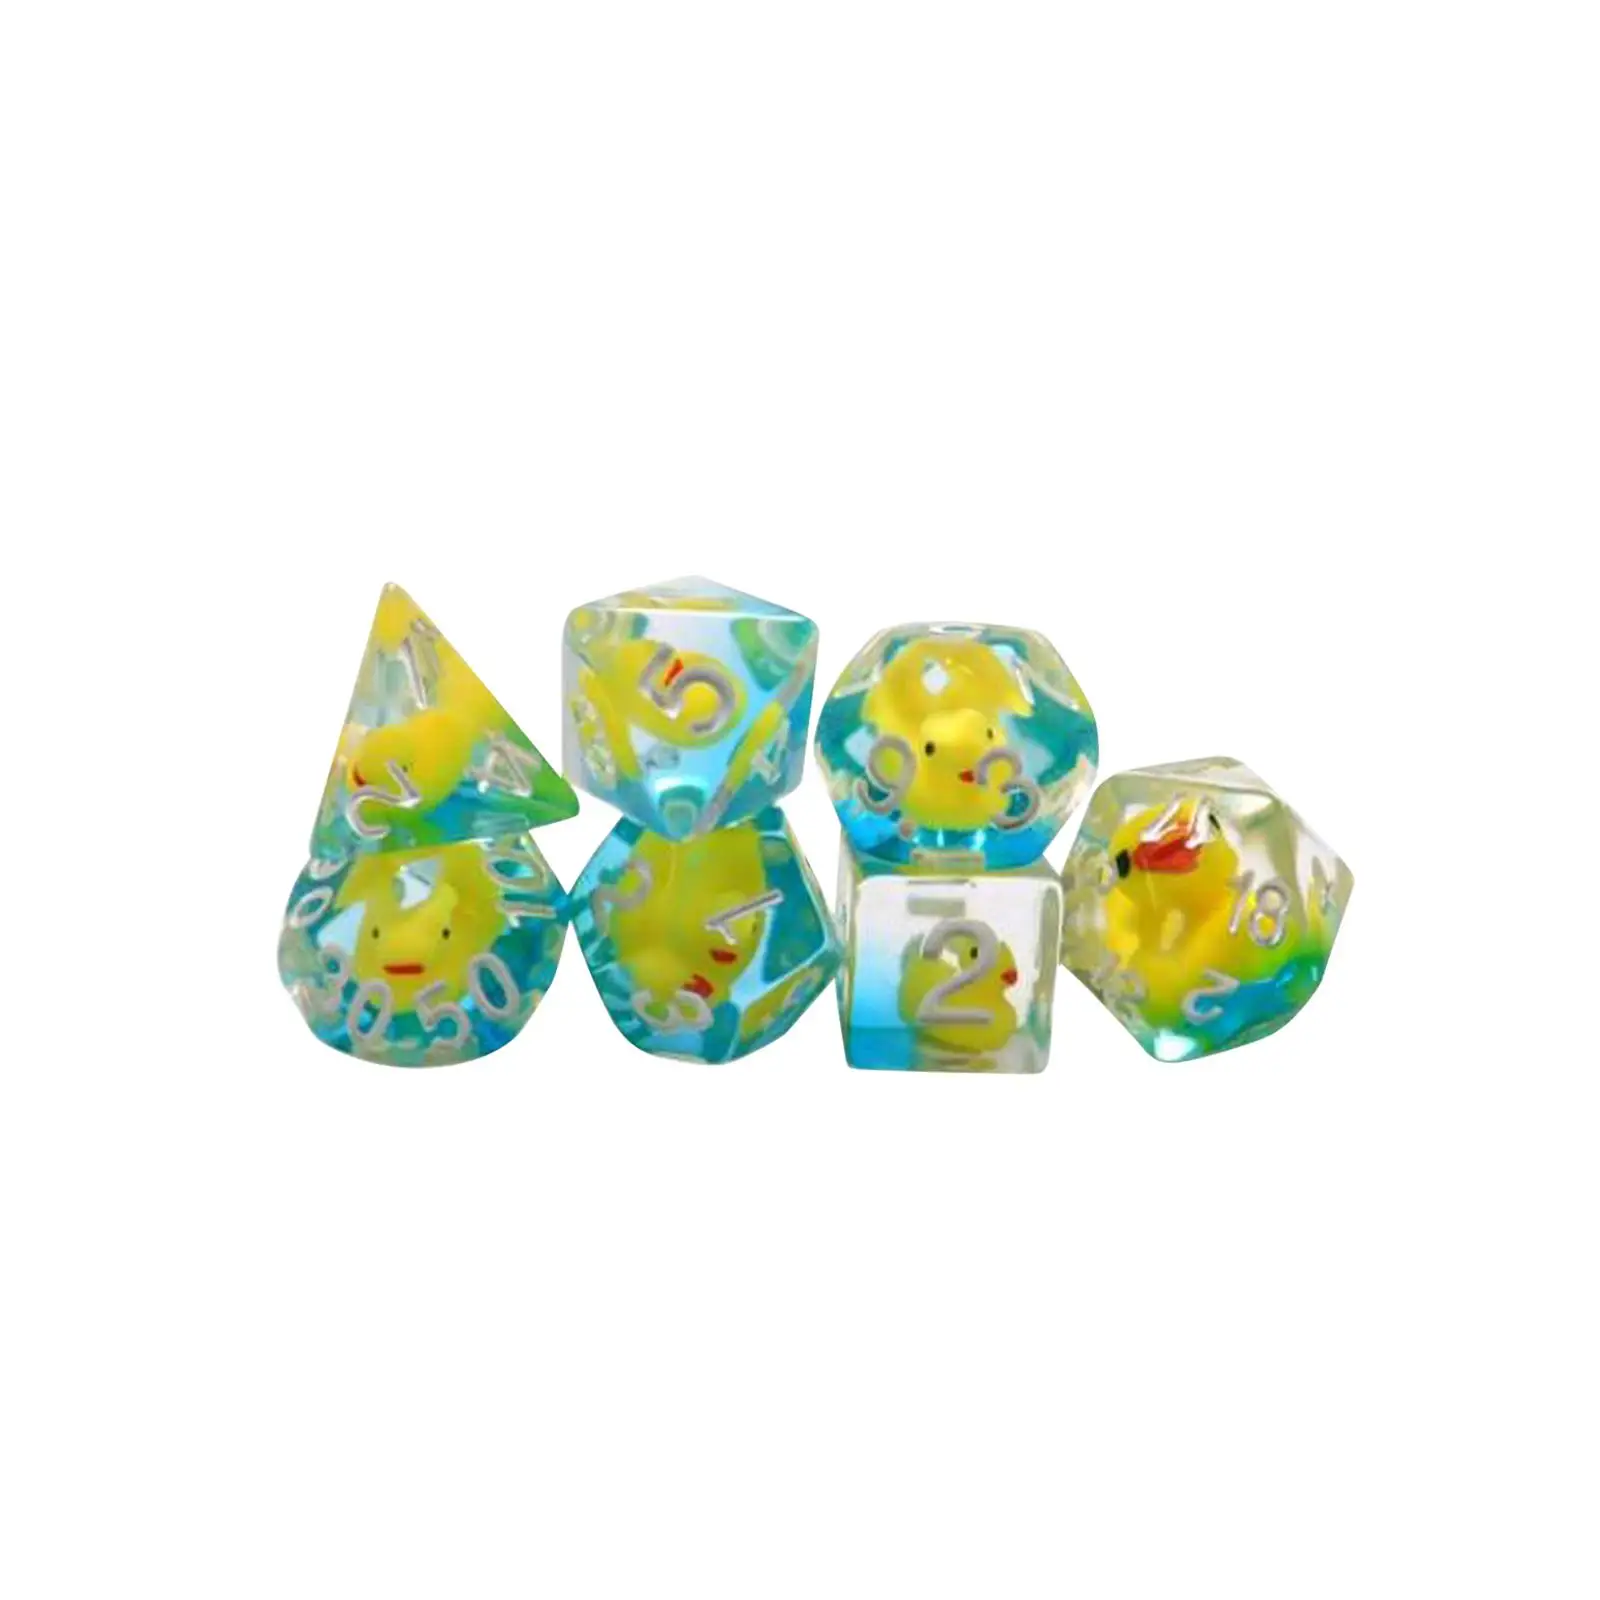 7x Polyhedral Dices Set Role Playing Game Dices Playing Dices Party Favors Resin Dices for Bar KTV Card Games Role Playing Game